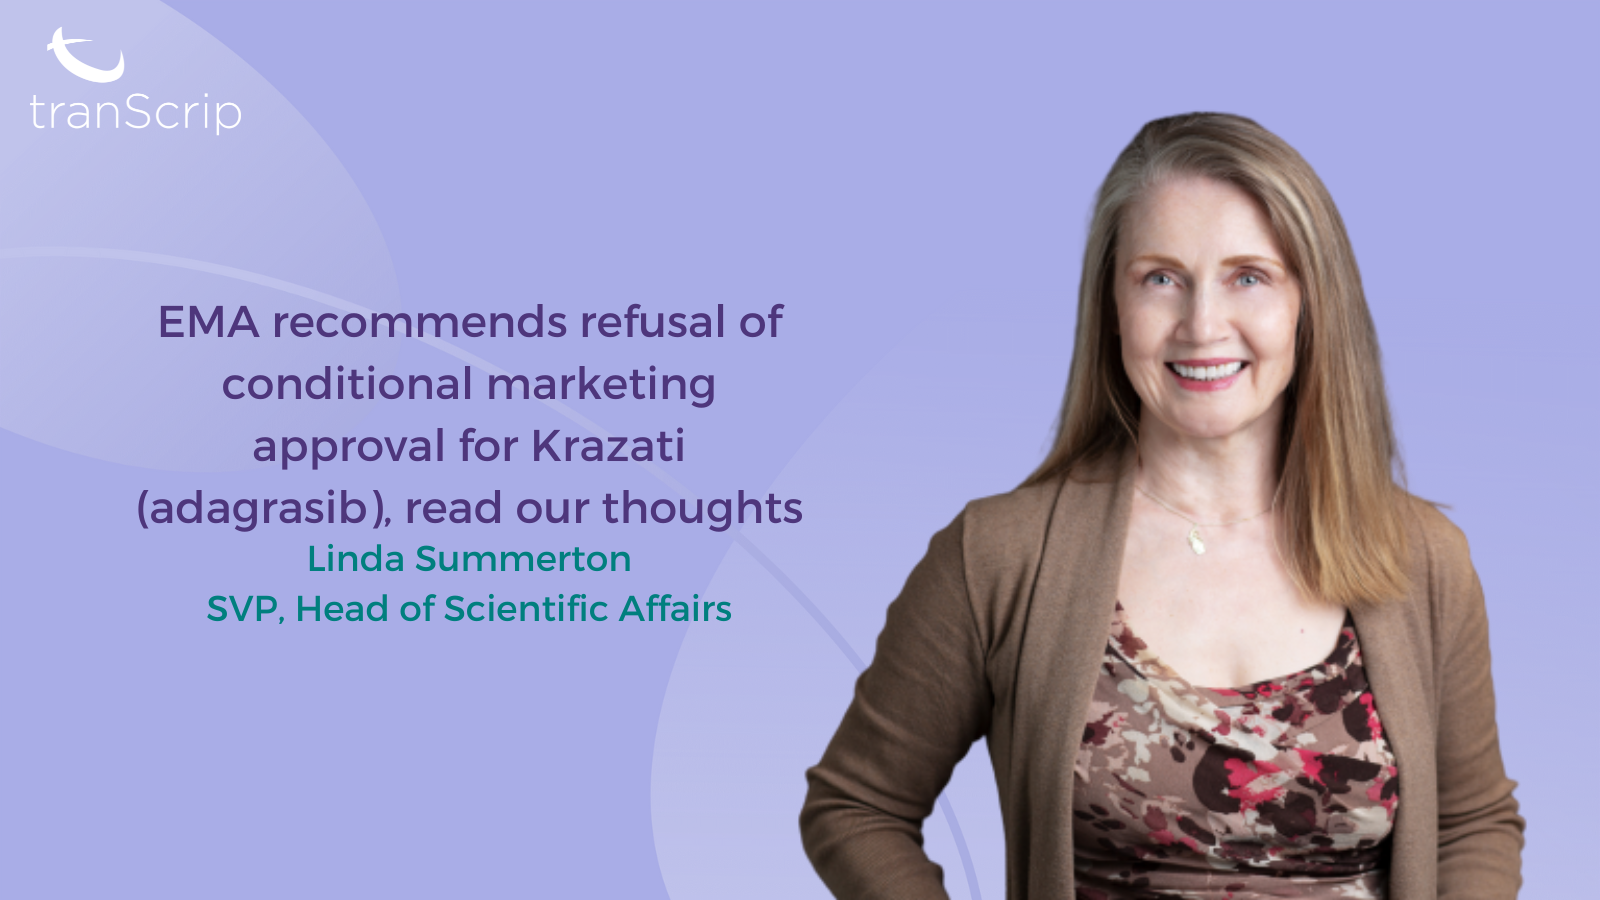 EMA recommends refusal of conditional marketing approval for Krazati (adagrasib), read our thoughts Featured Image